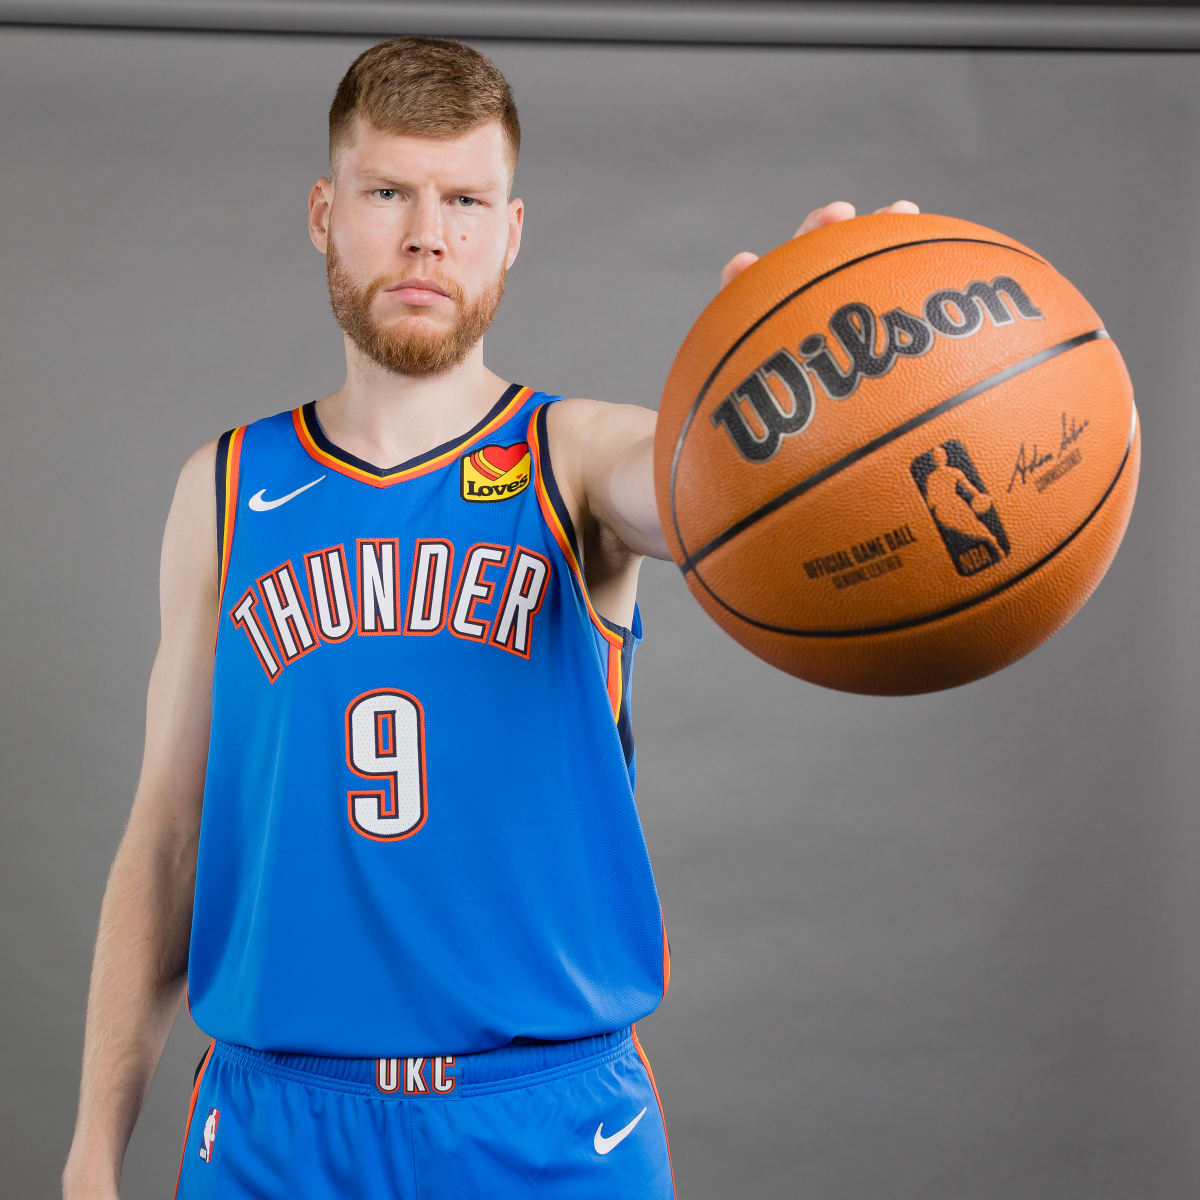 Davis Bertans' Trade to OKC Thunder was Unexpected: 'It Took a